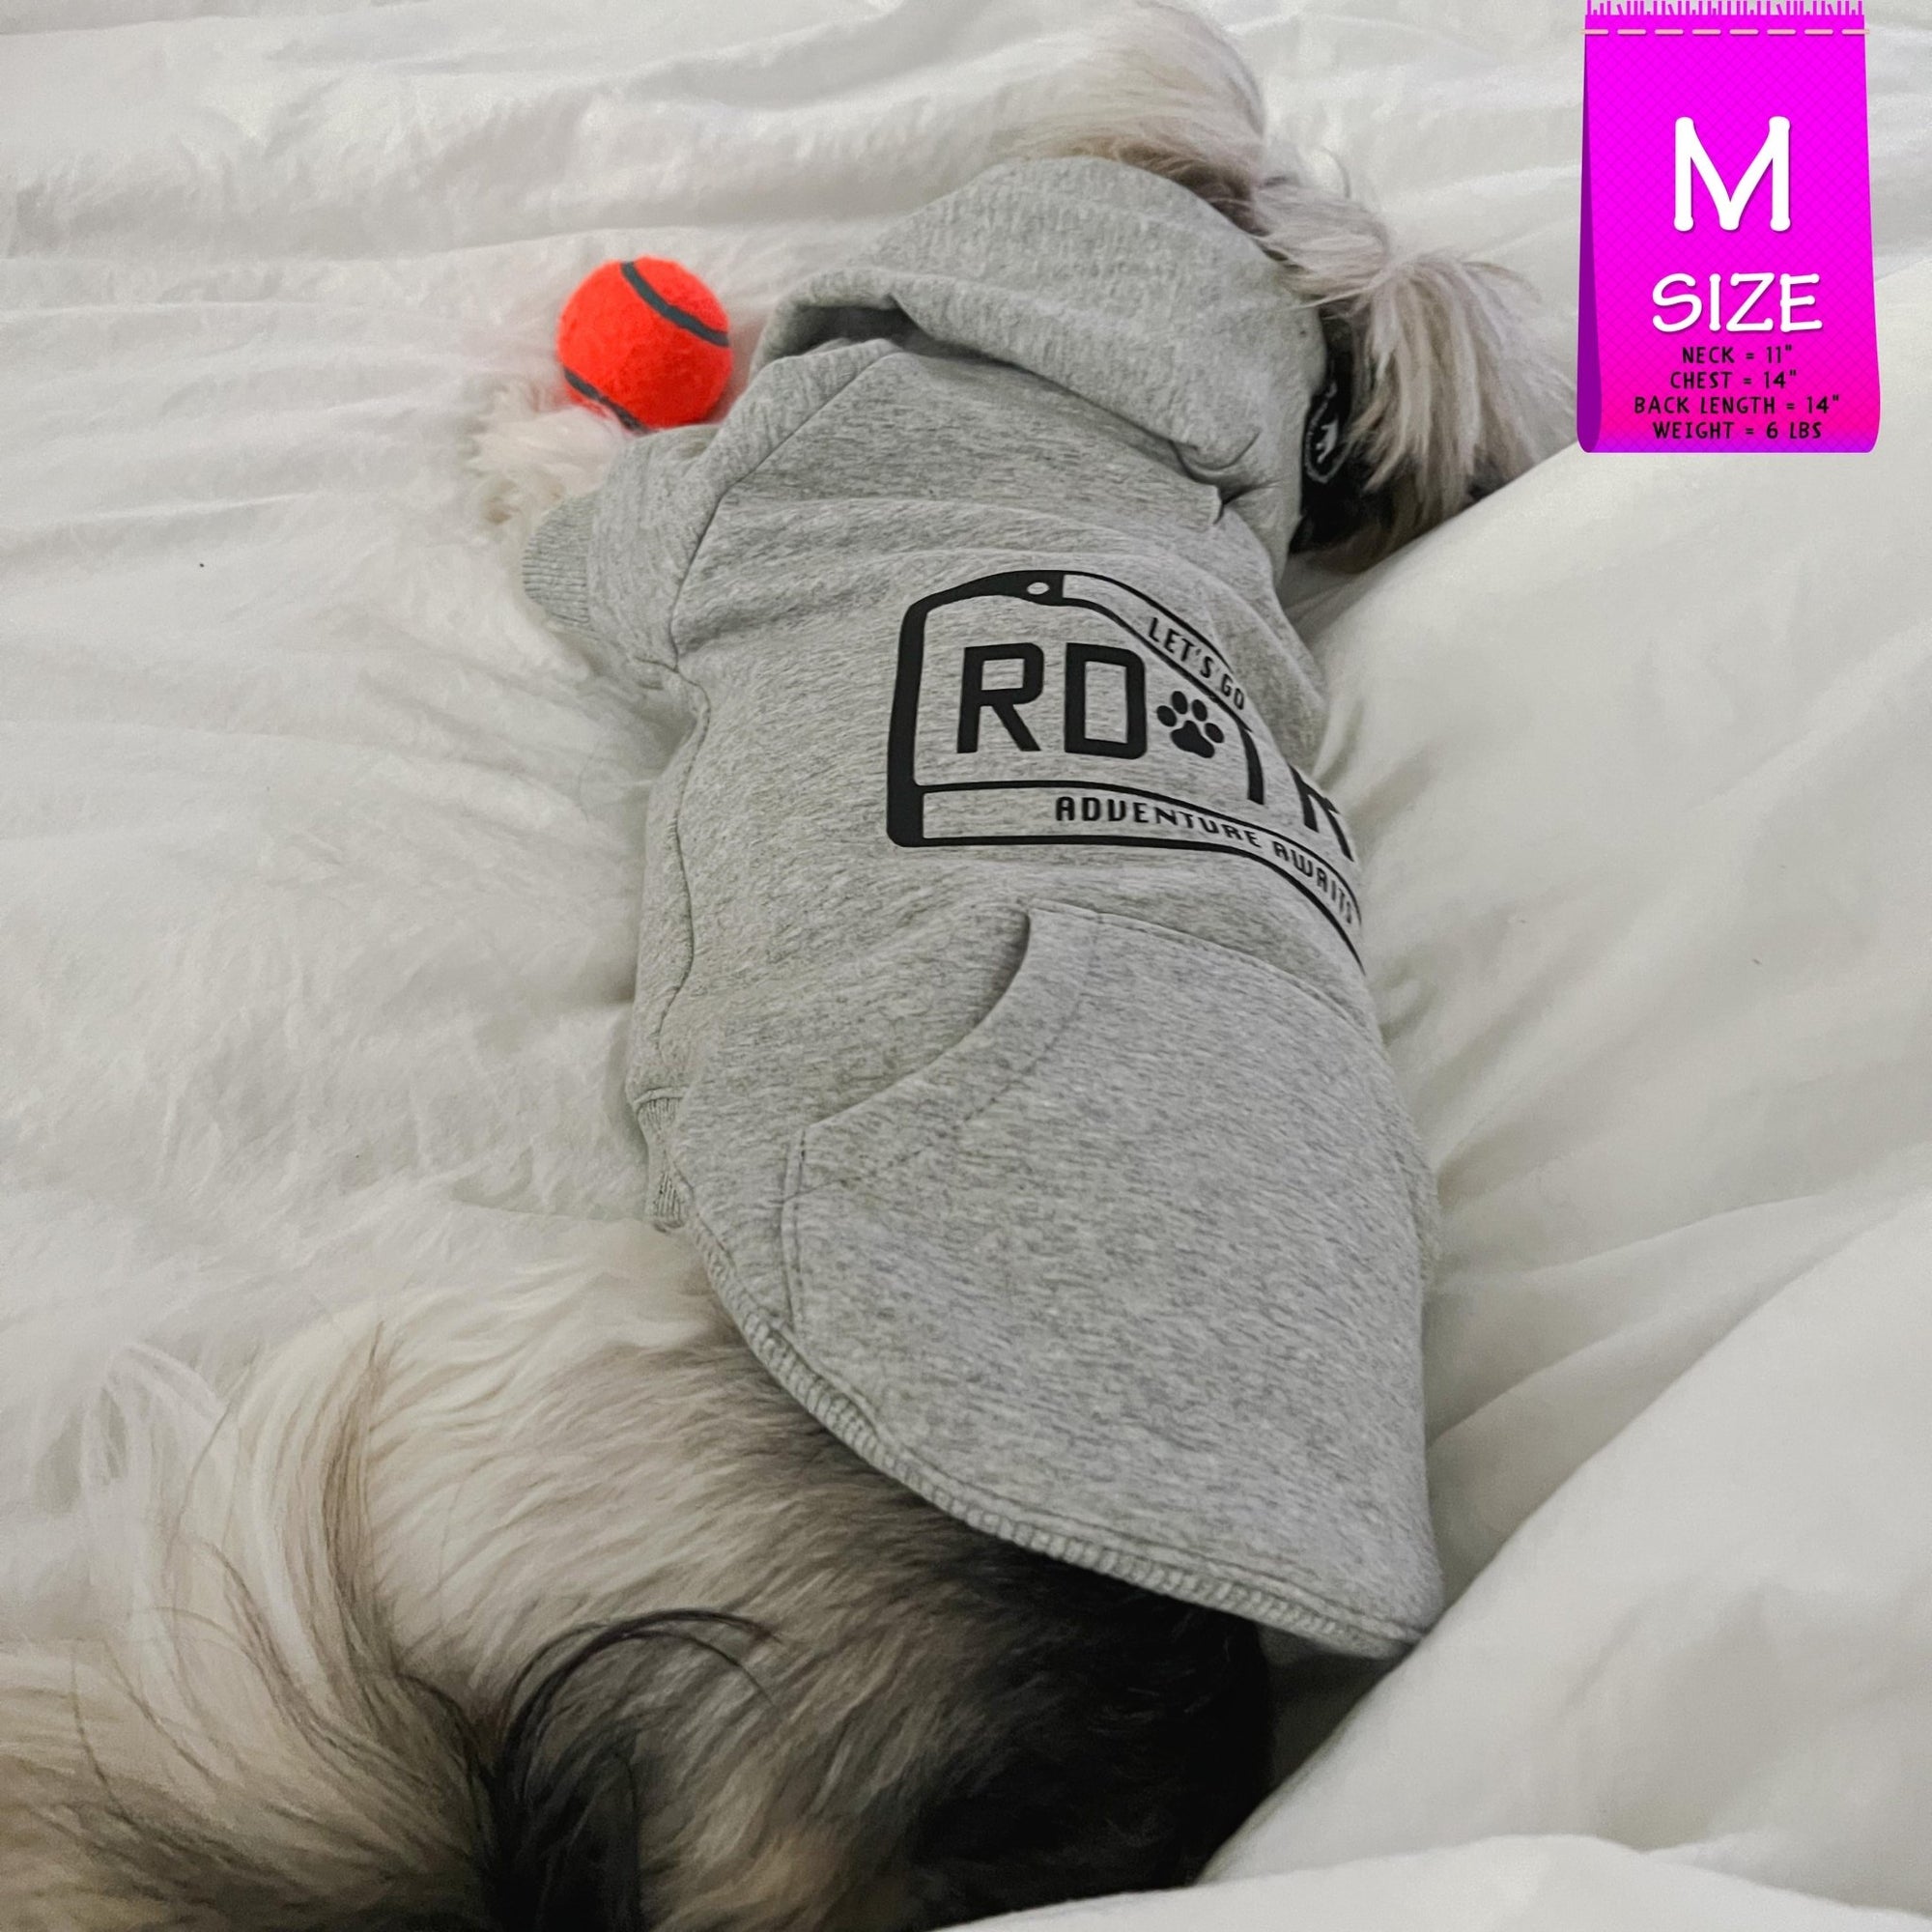 Dog Hoodie - Hoodies For Dogs - Shih Tzu mix wearing &quot;Road Trip&quot; License Plate design in gray - back view - laying on the bed sleeping with orange tennis ball toy - Wag Trendz